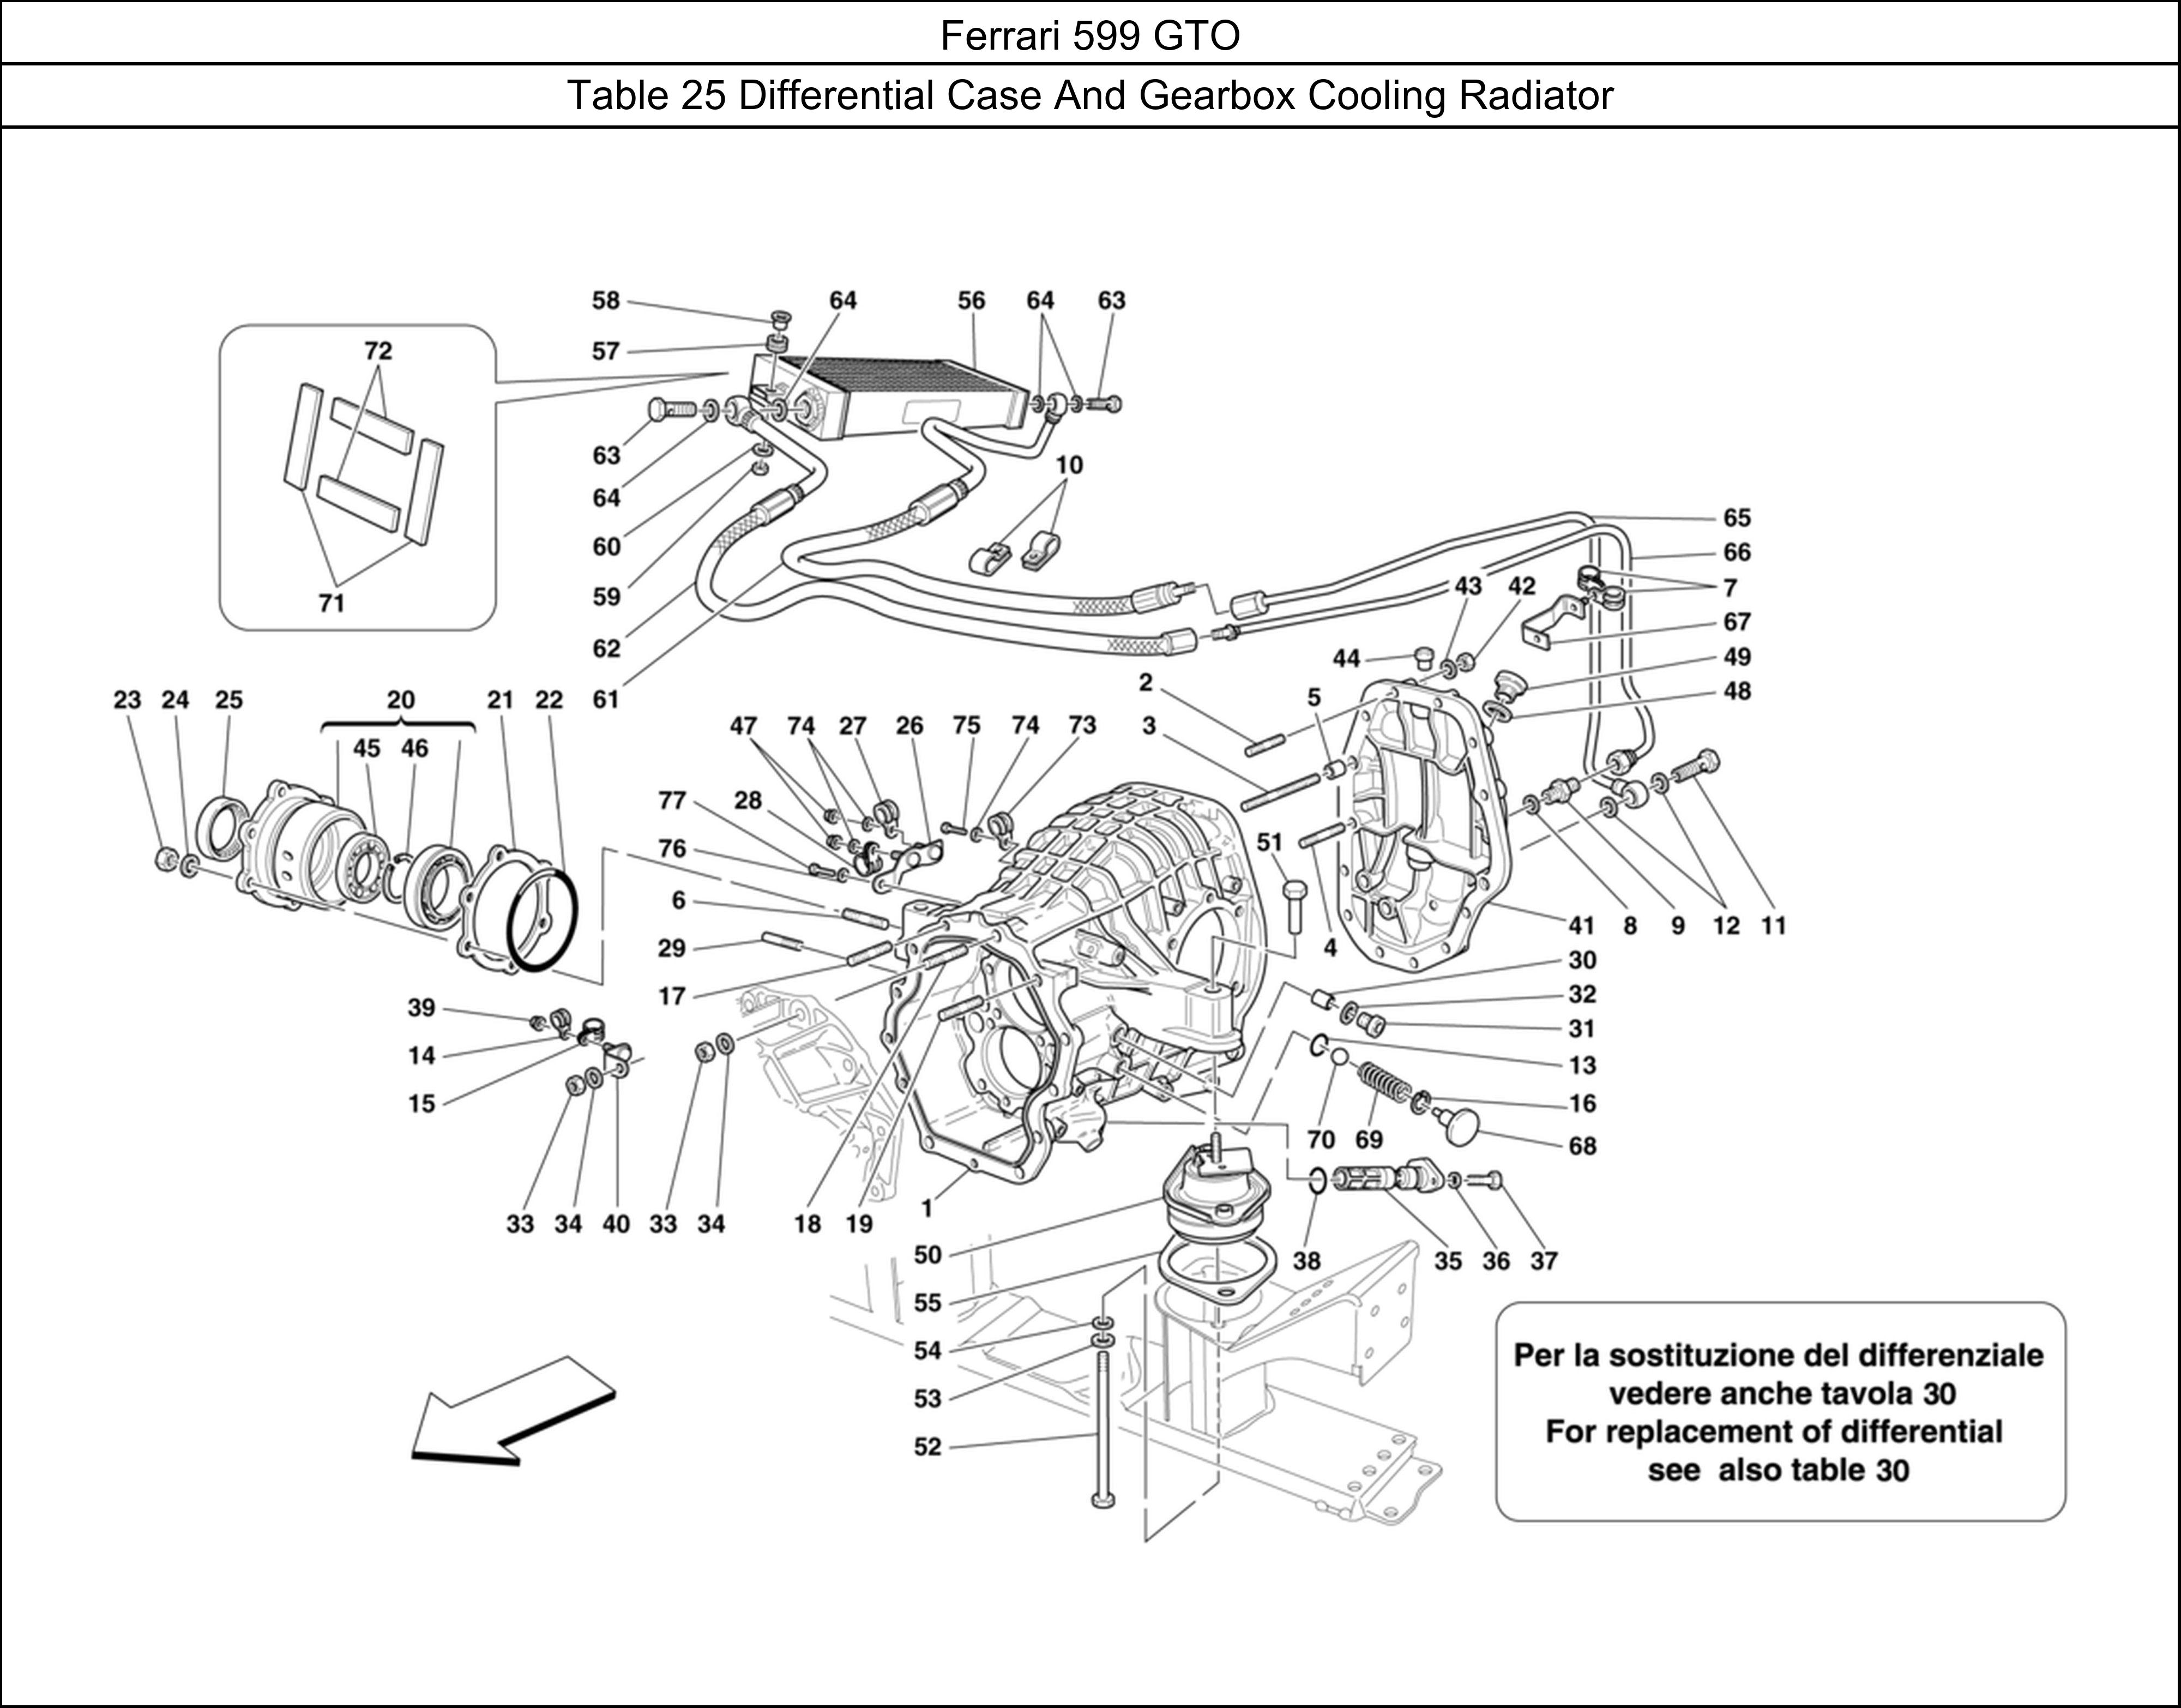 Ferrari Parts Ferrari 599 GTO Table 25 Differential Case And Gearbox Cooling Radiator